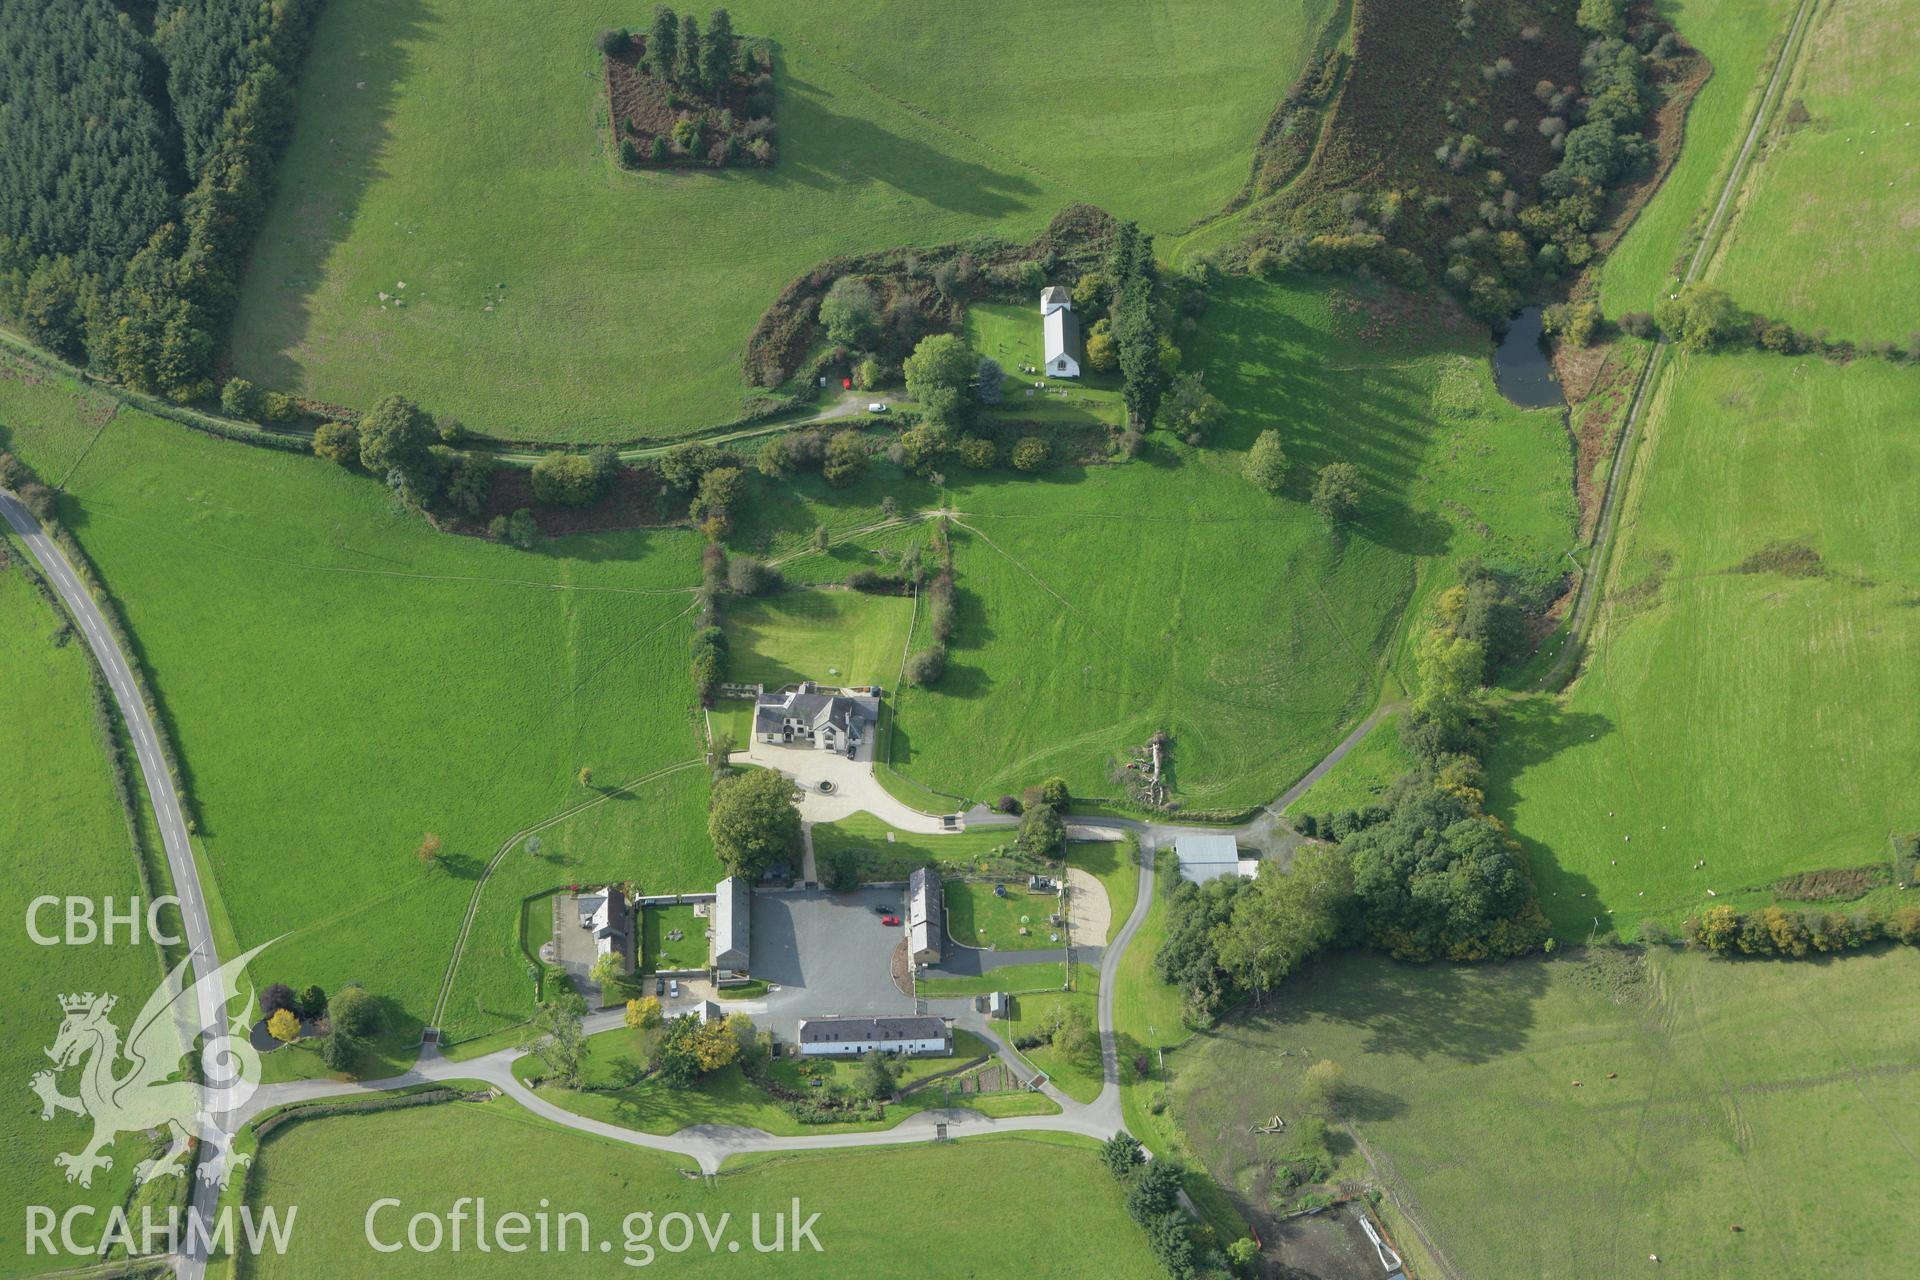 RCAHMW colour oblique photograph of St Mary's Church, Pilleth, with earthworks. Taken by Toby Driver on 10/10/2008.